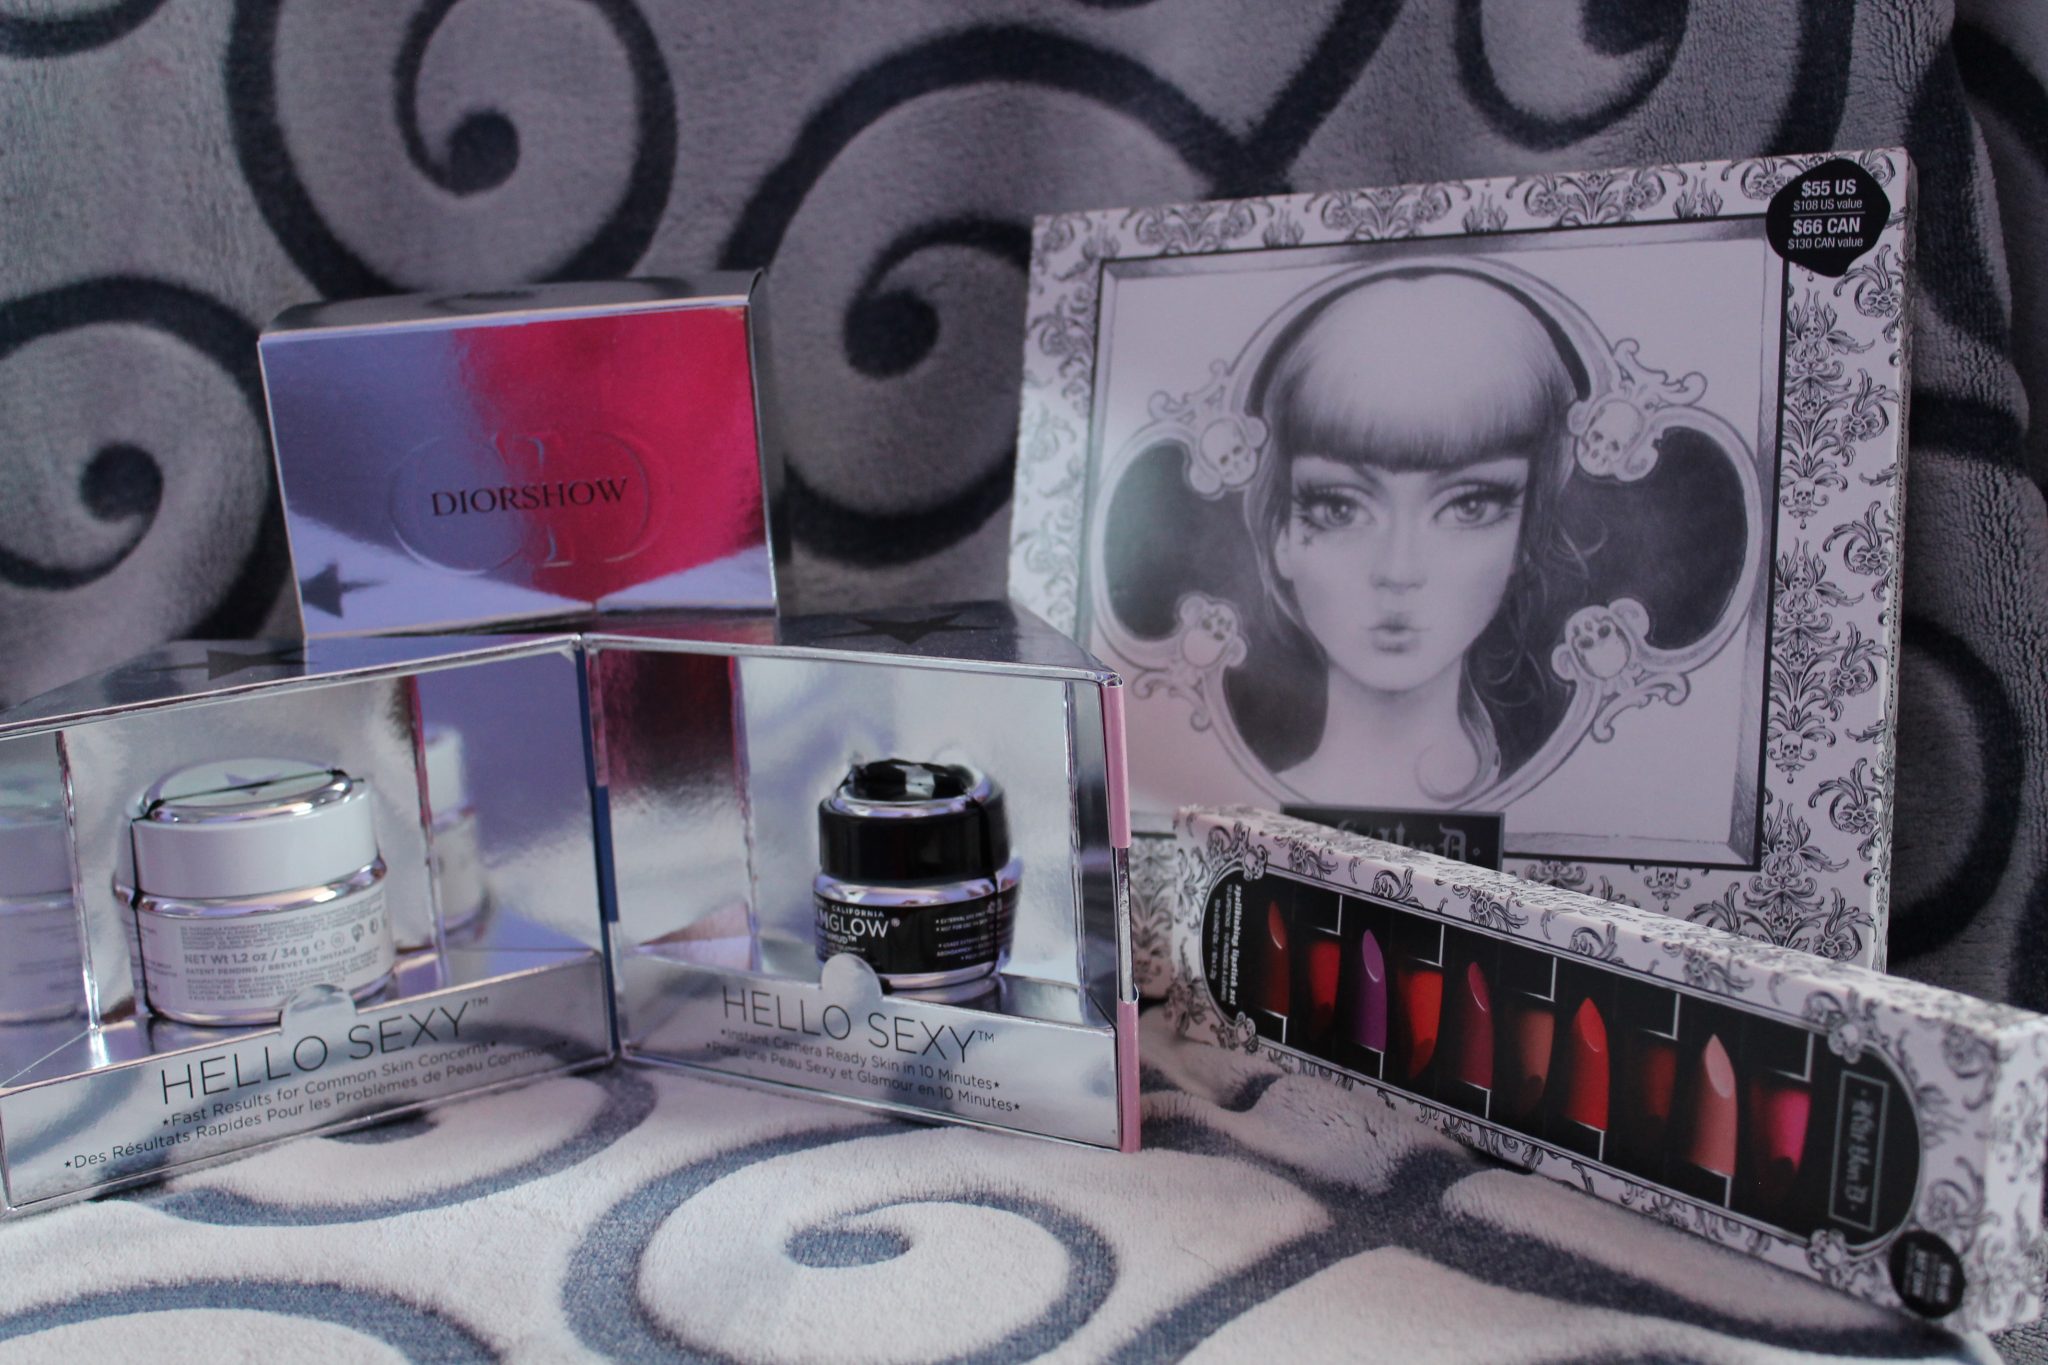 Sephora Review And Giveaway: Kat Von D, Glam Glow & Dior “DIORSHOW”